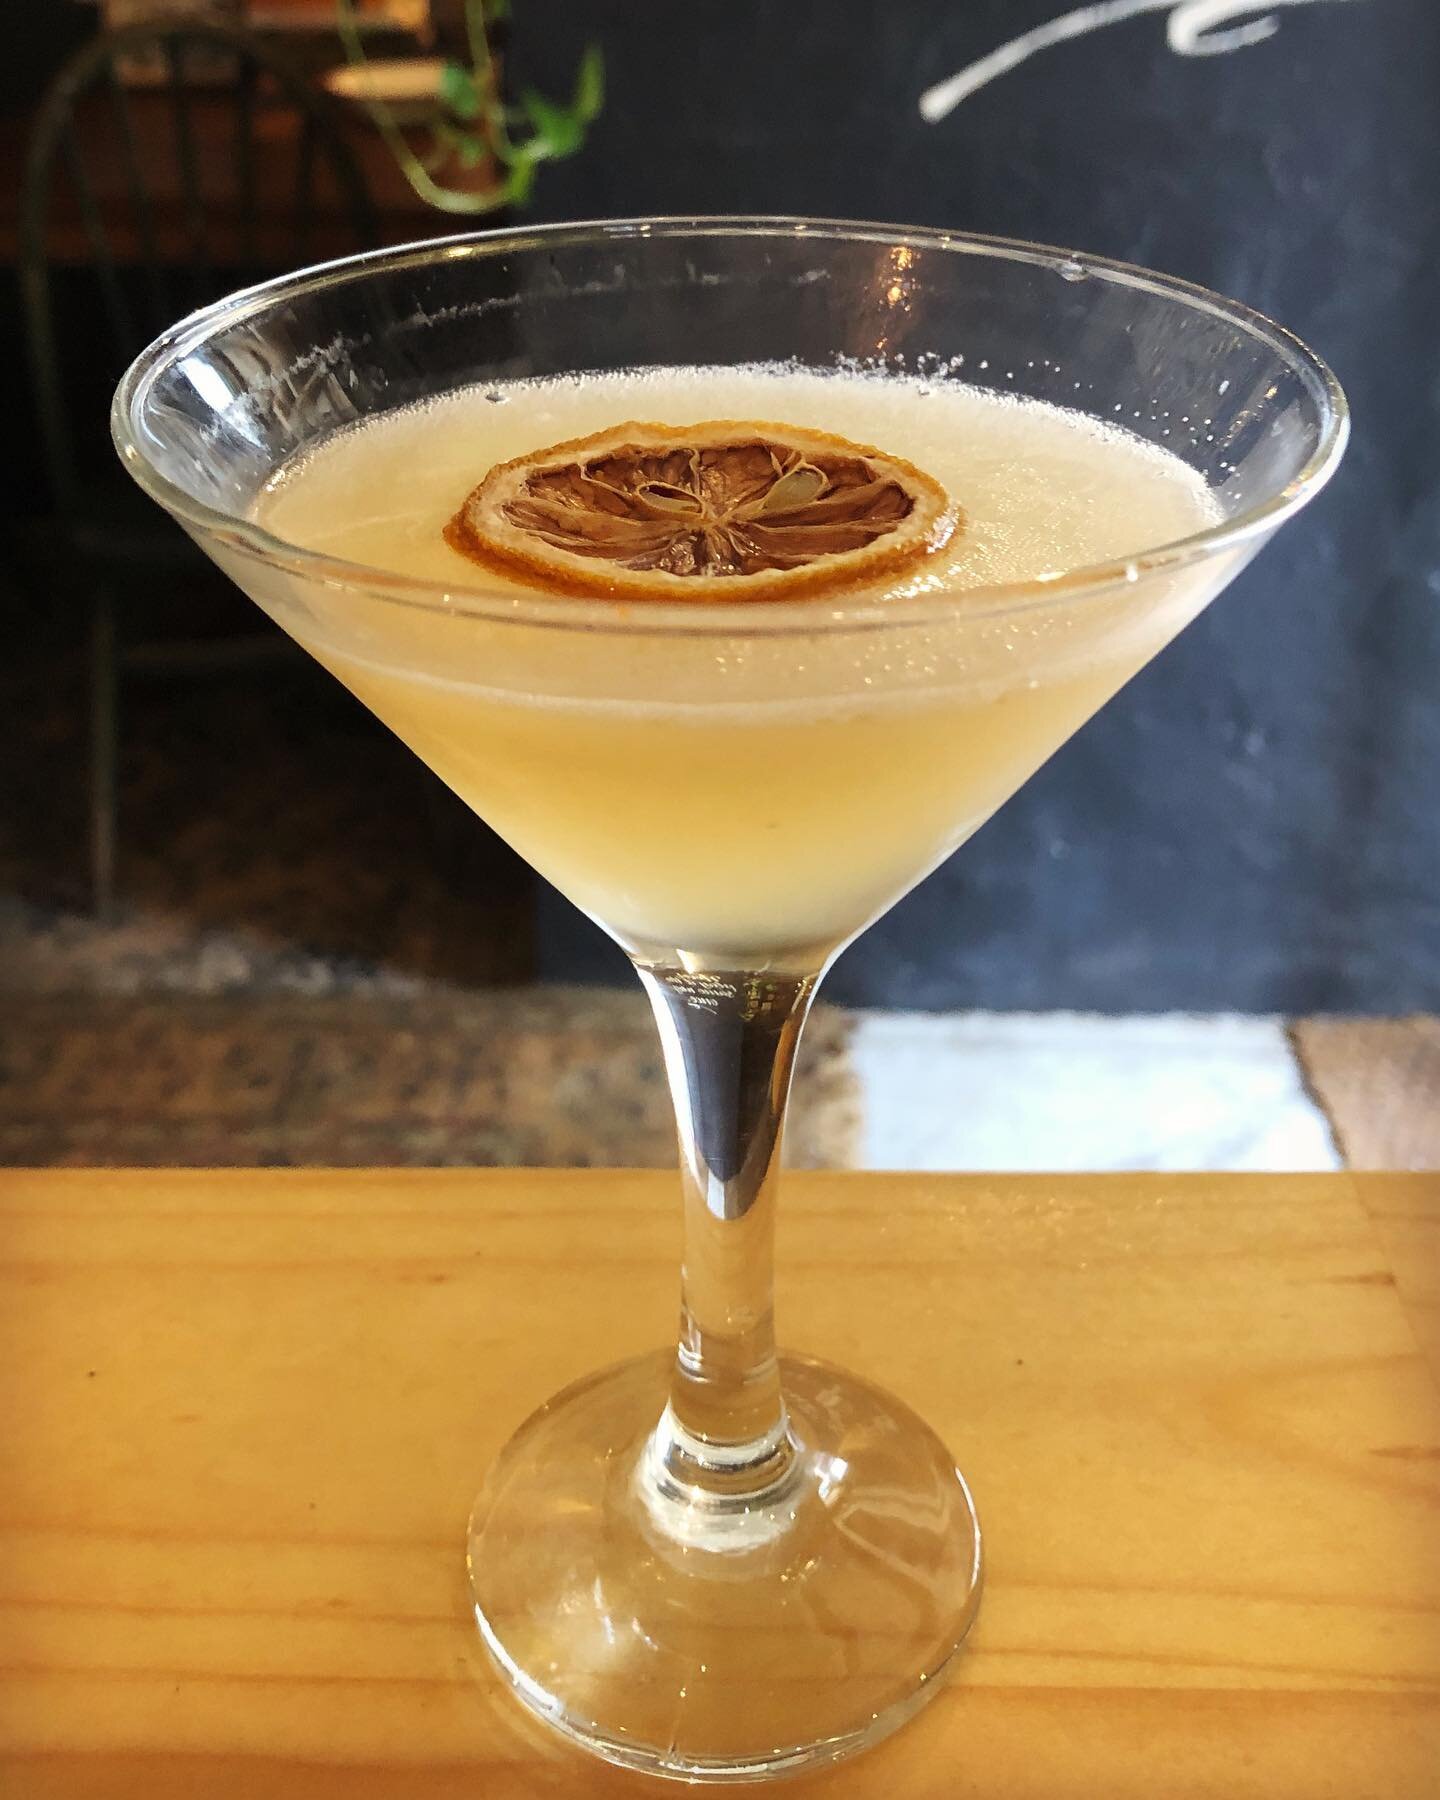 Now serving&hellip;
Corpse Reviver No. 2

Mountain Gin, Green Lightning Absinthe, triple sec, dry vermouth, lemon

A prohibition era cocktail that may or may not revive the dead&hellip;but it&rsquo;s guaranteed to awaken the taste buds of the living!